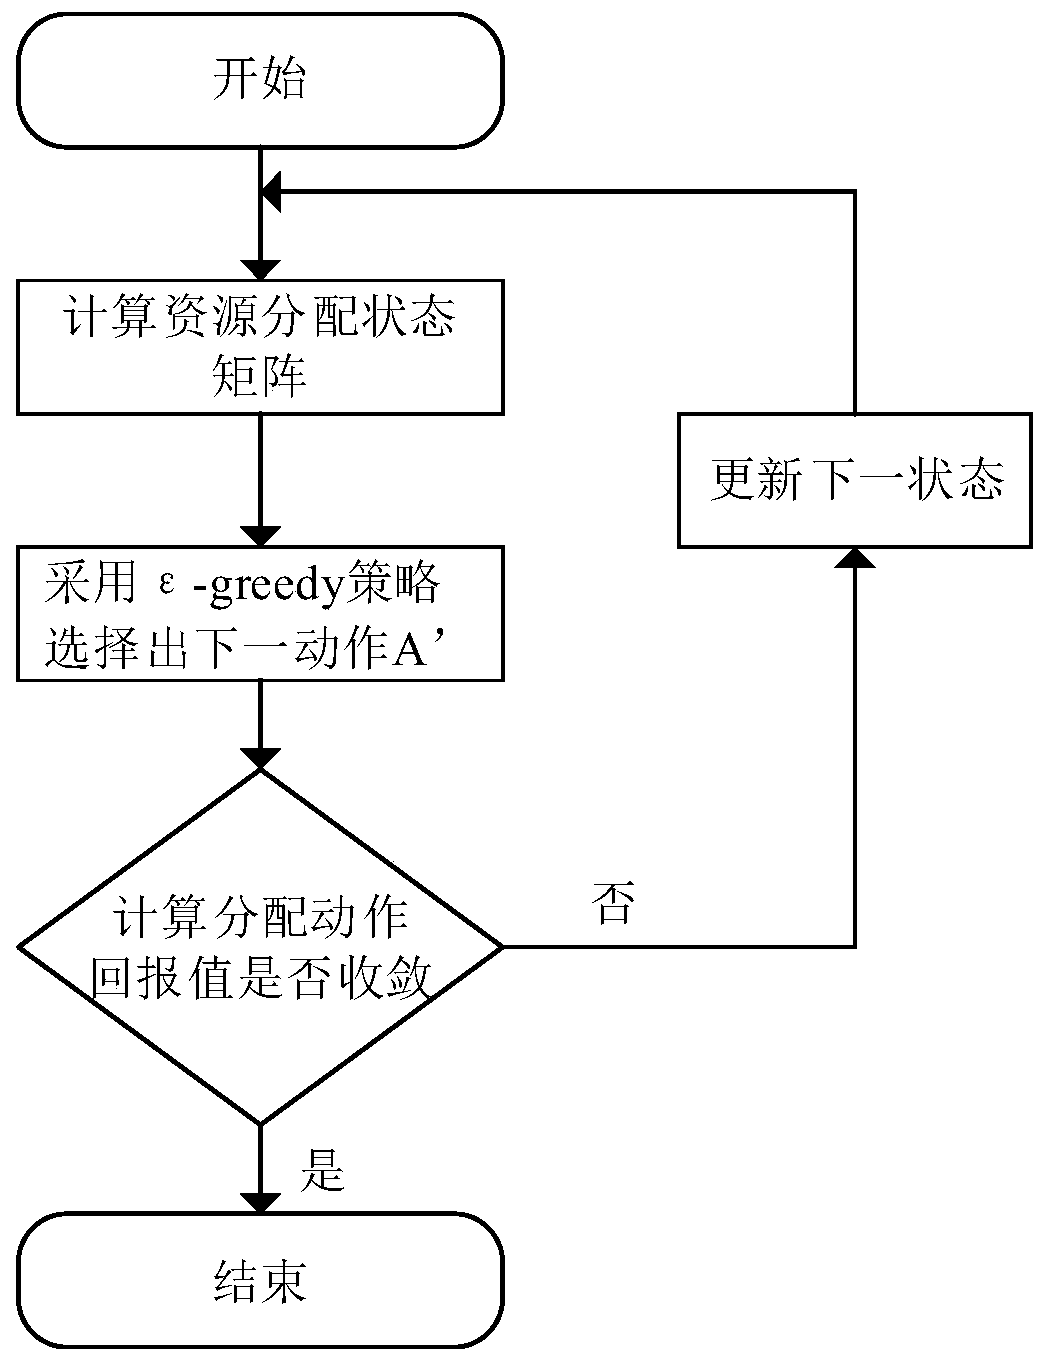 Electric vehicle charging scheduling method considering reservation and queuing in charging station